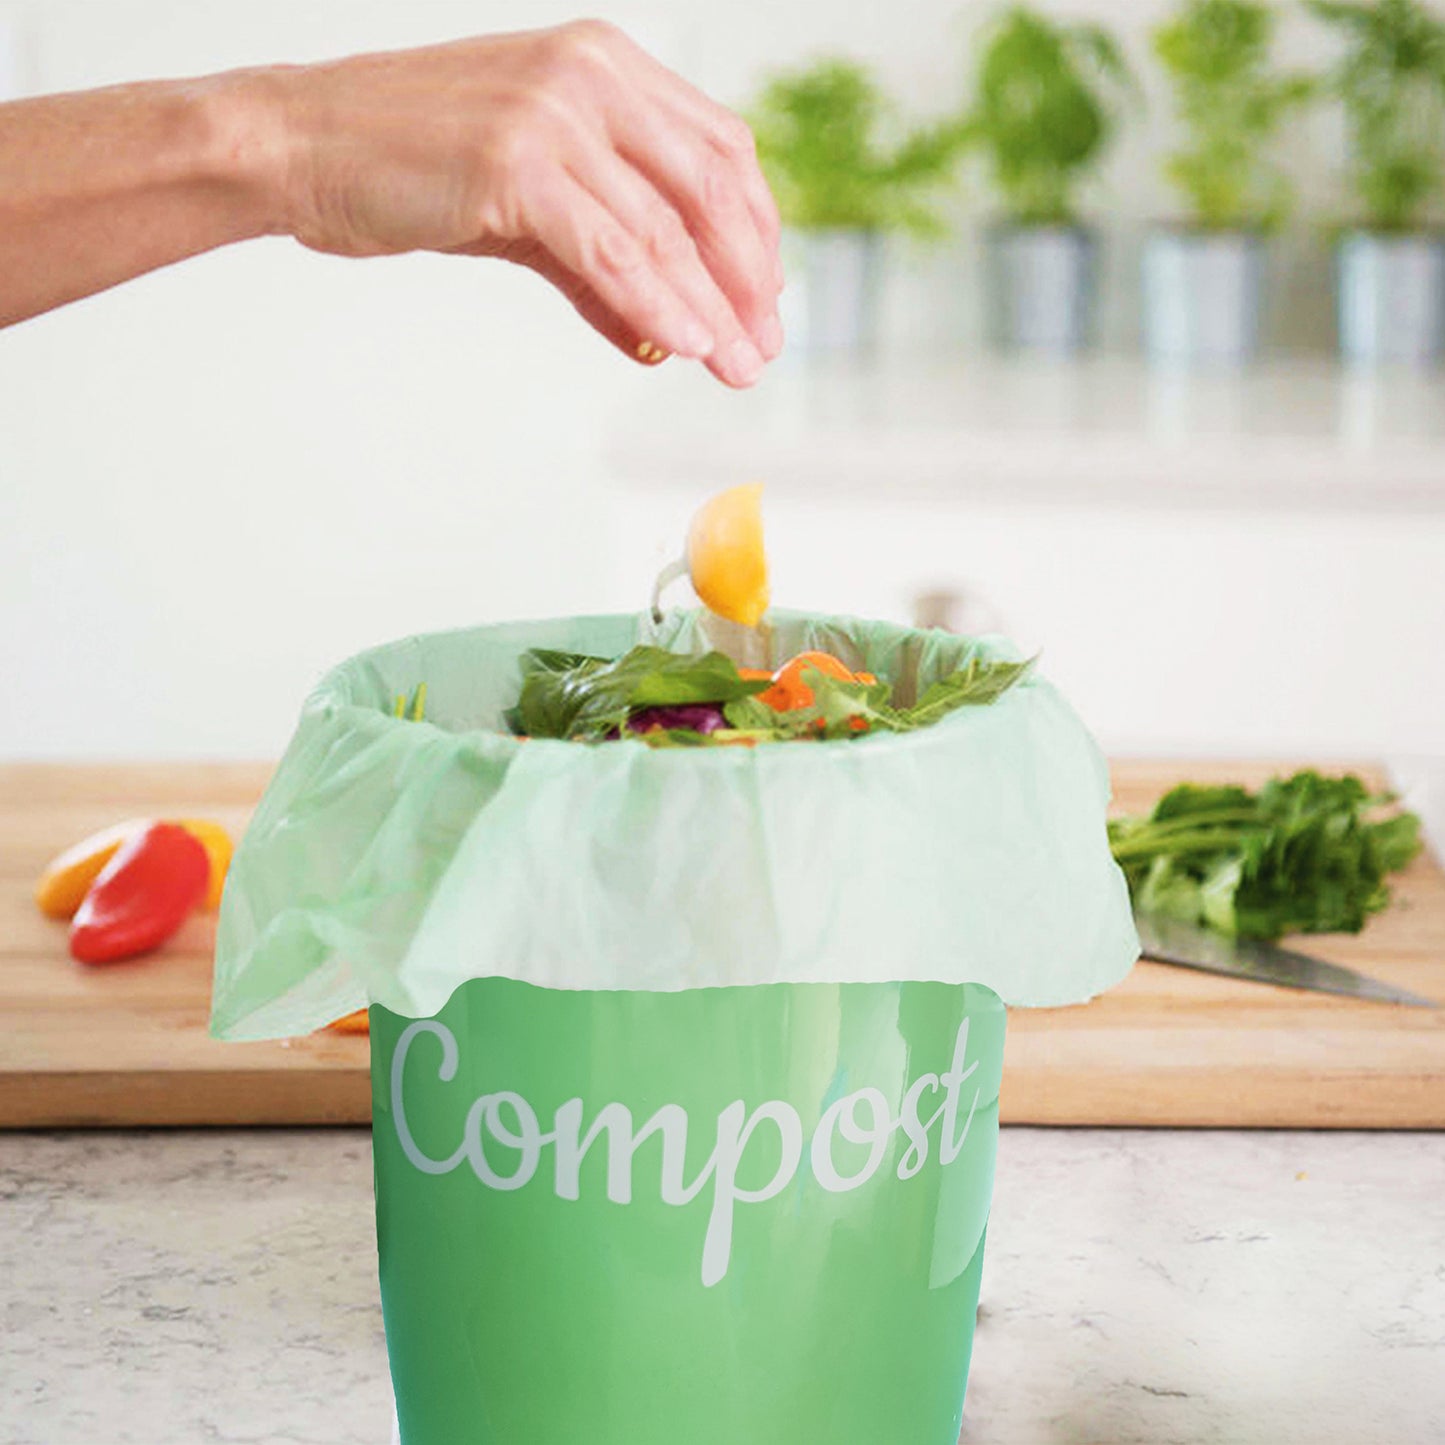 Compost Caddy White  Food Waste Container